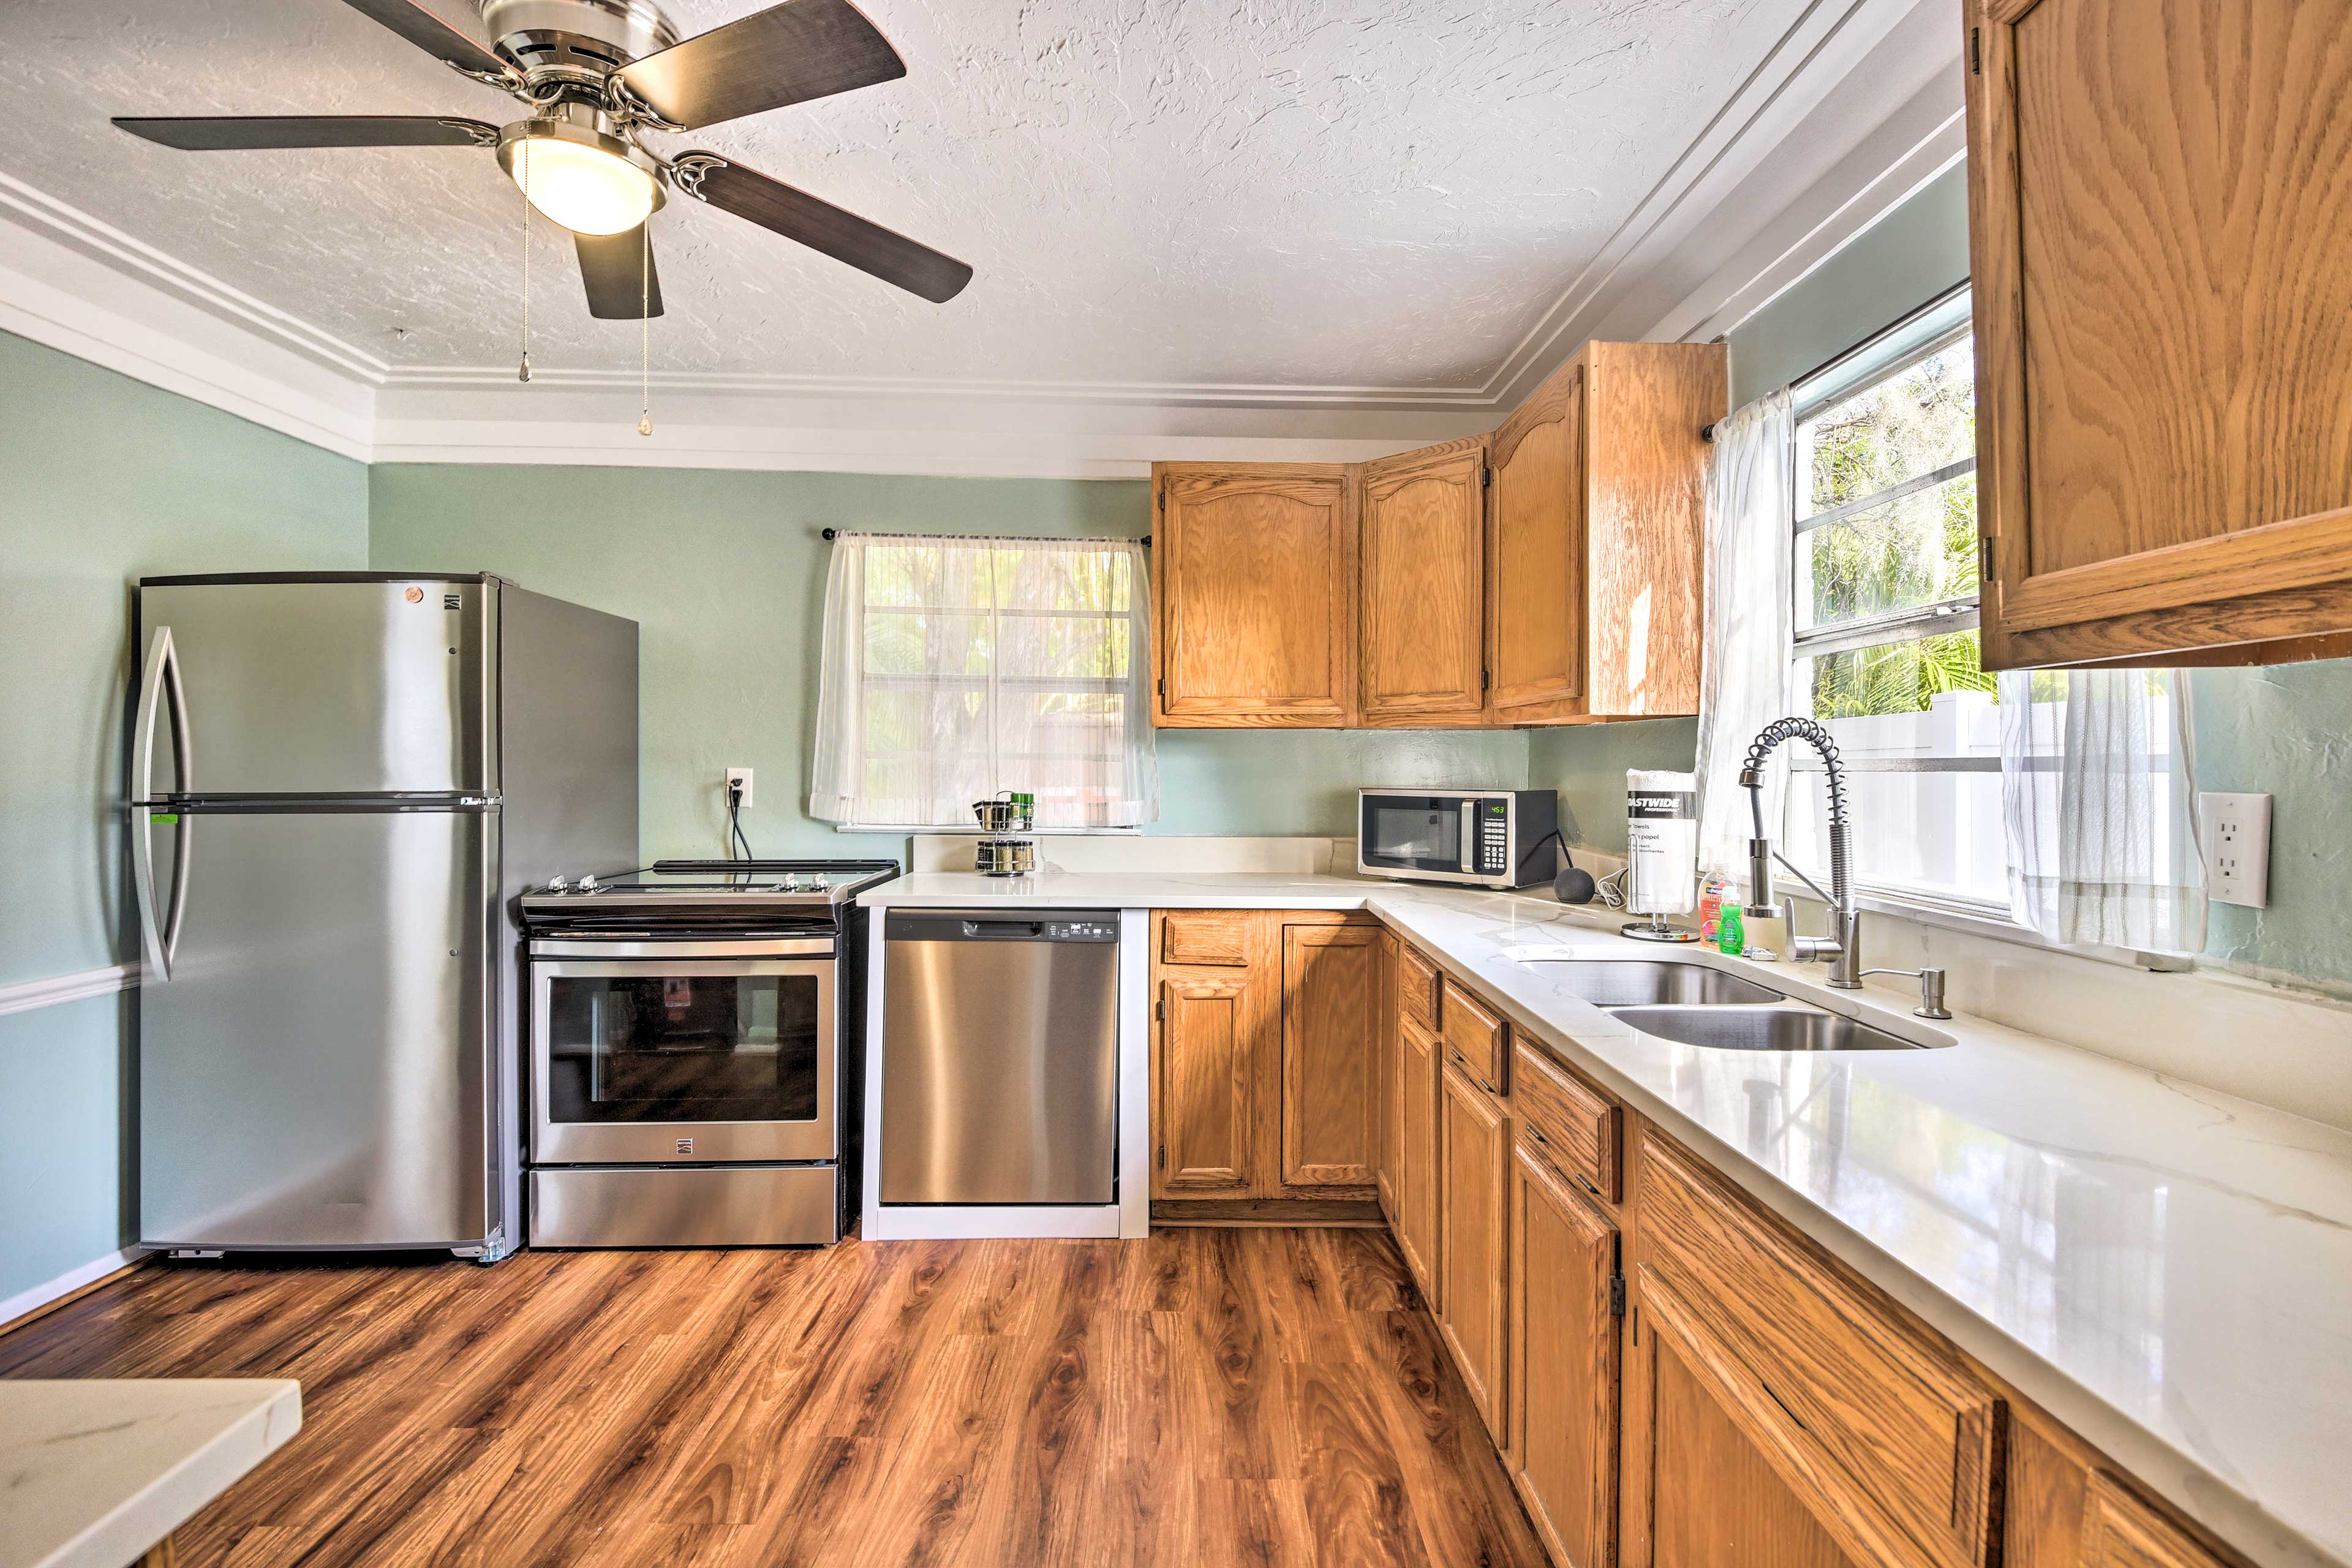 Kitchen | Toaster | Trash Bags & Paper Towels Provided | Complimentary Spices